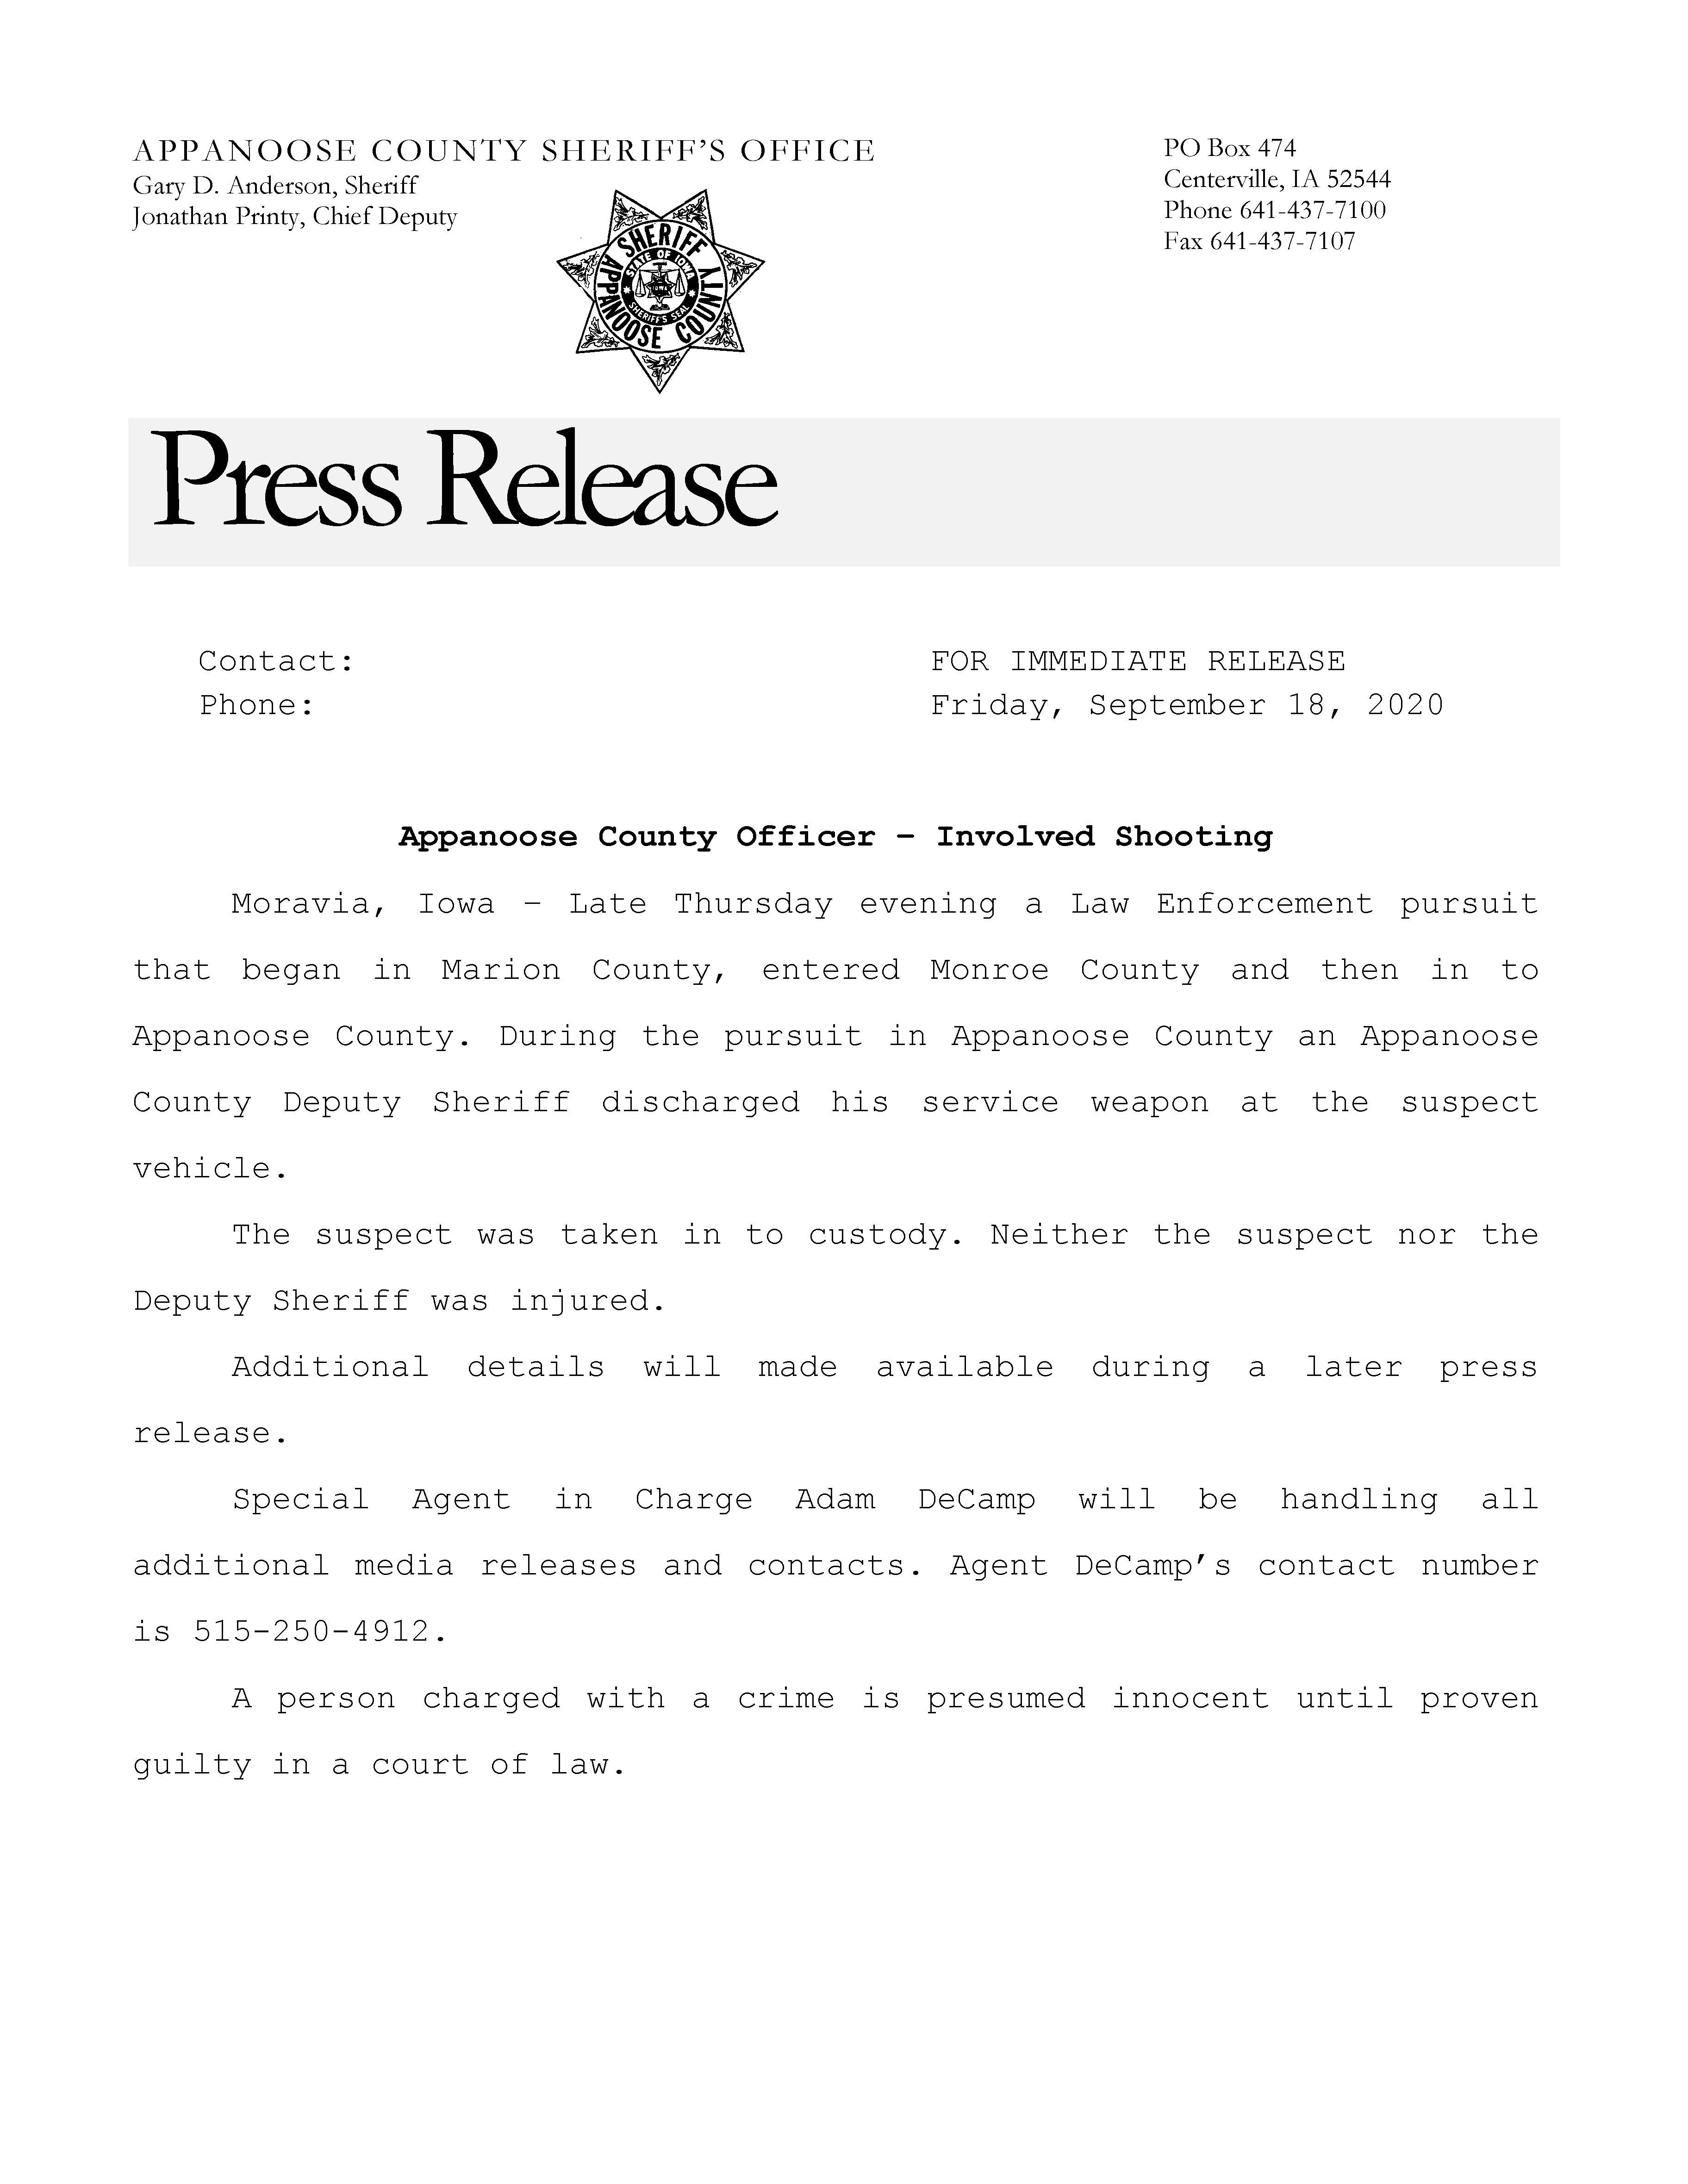 Link to Appanoose County press release